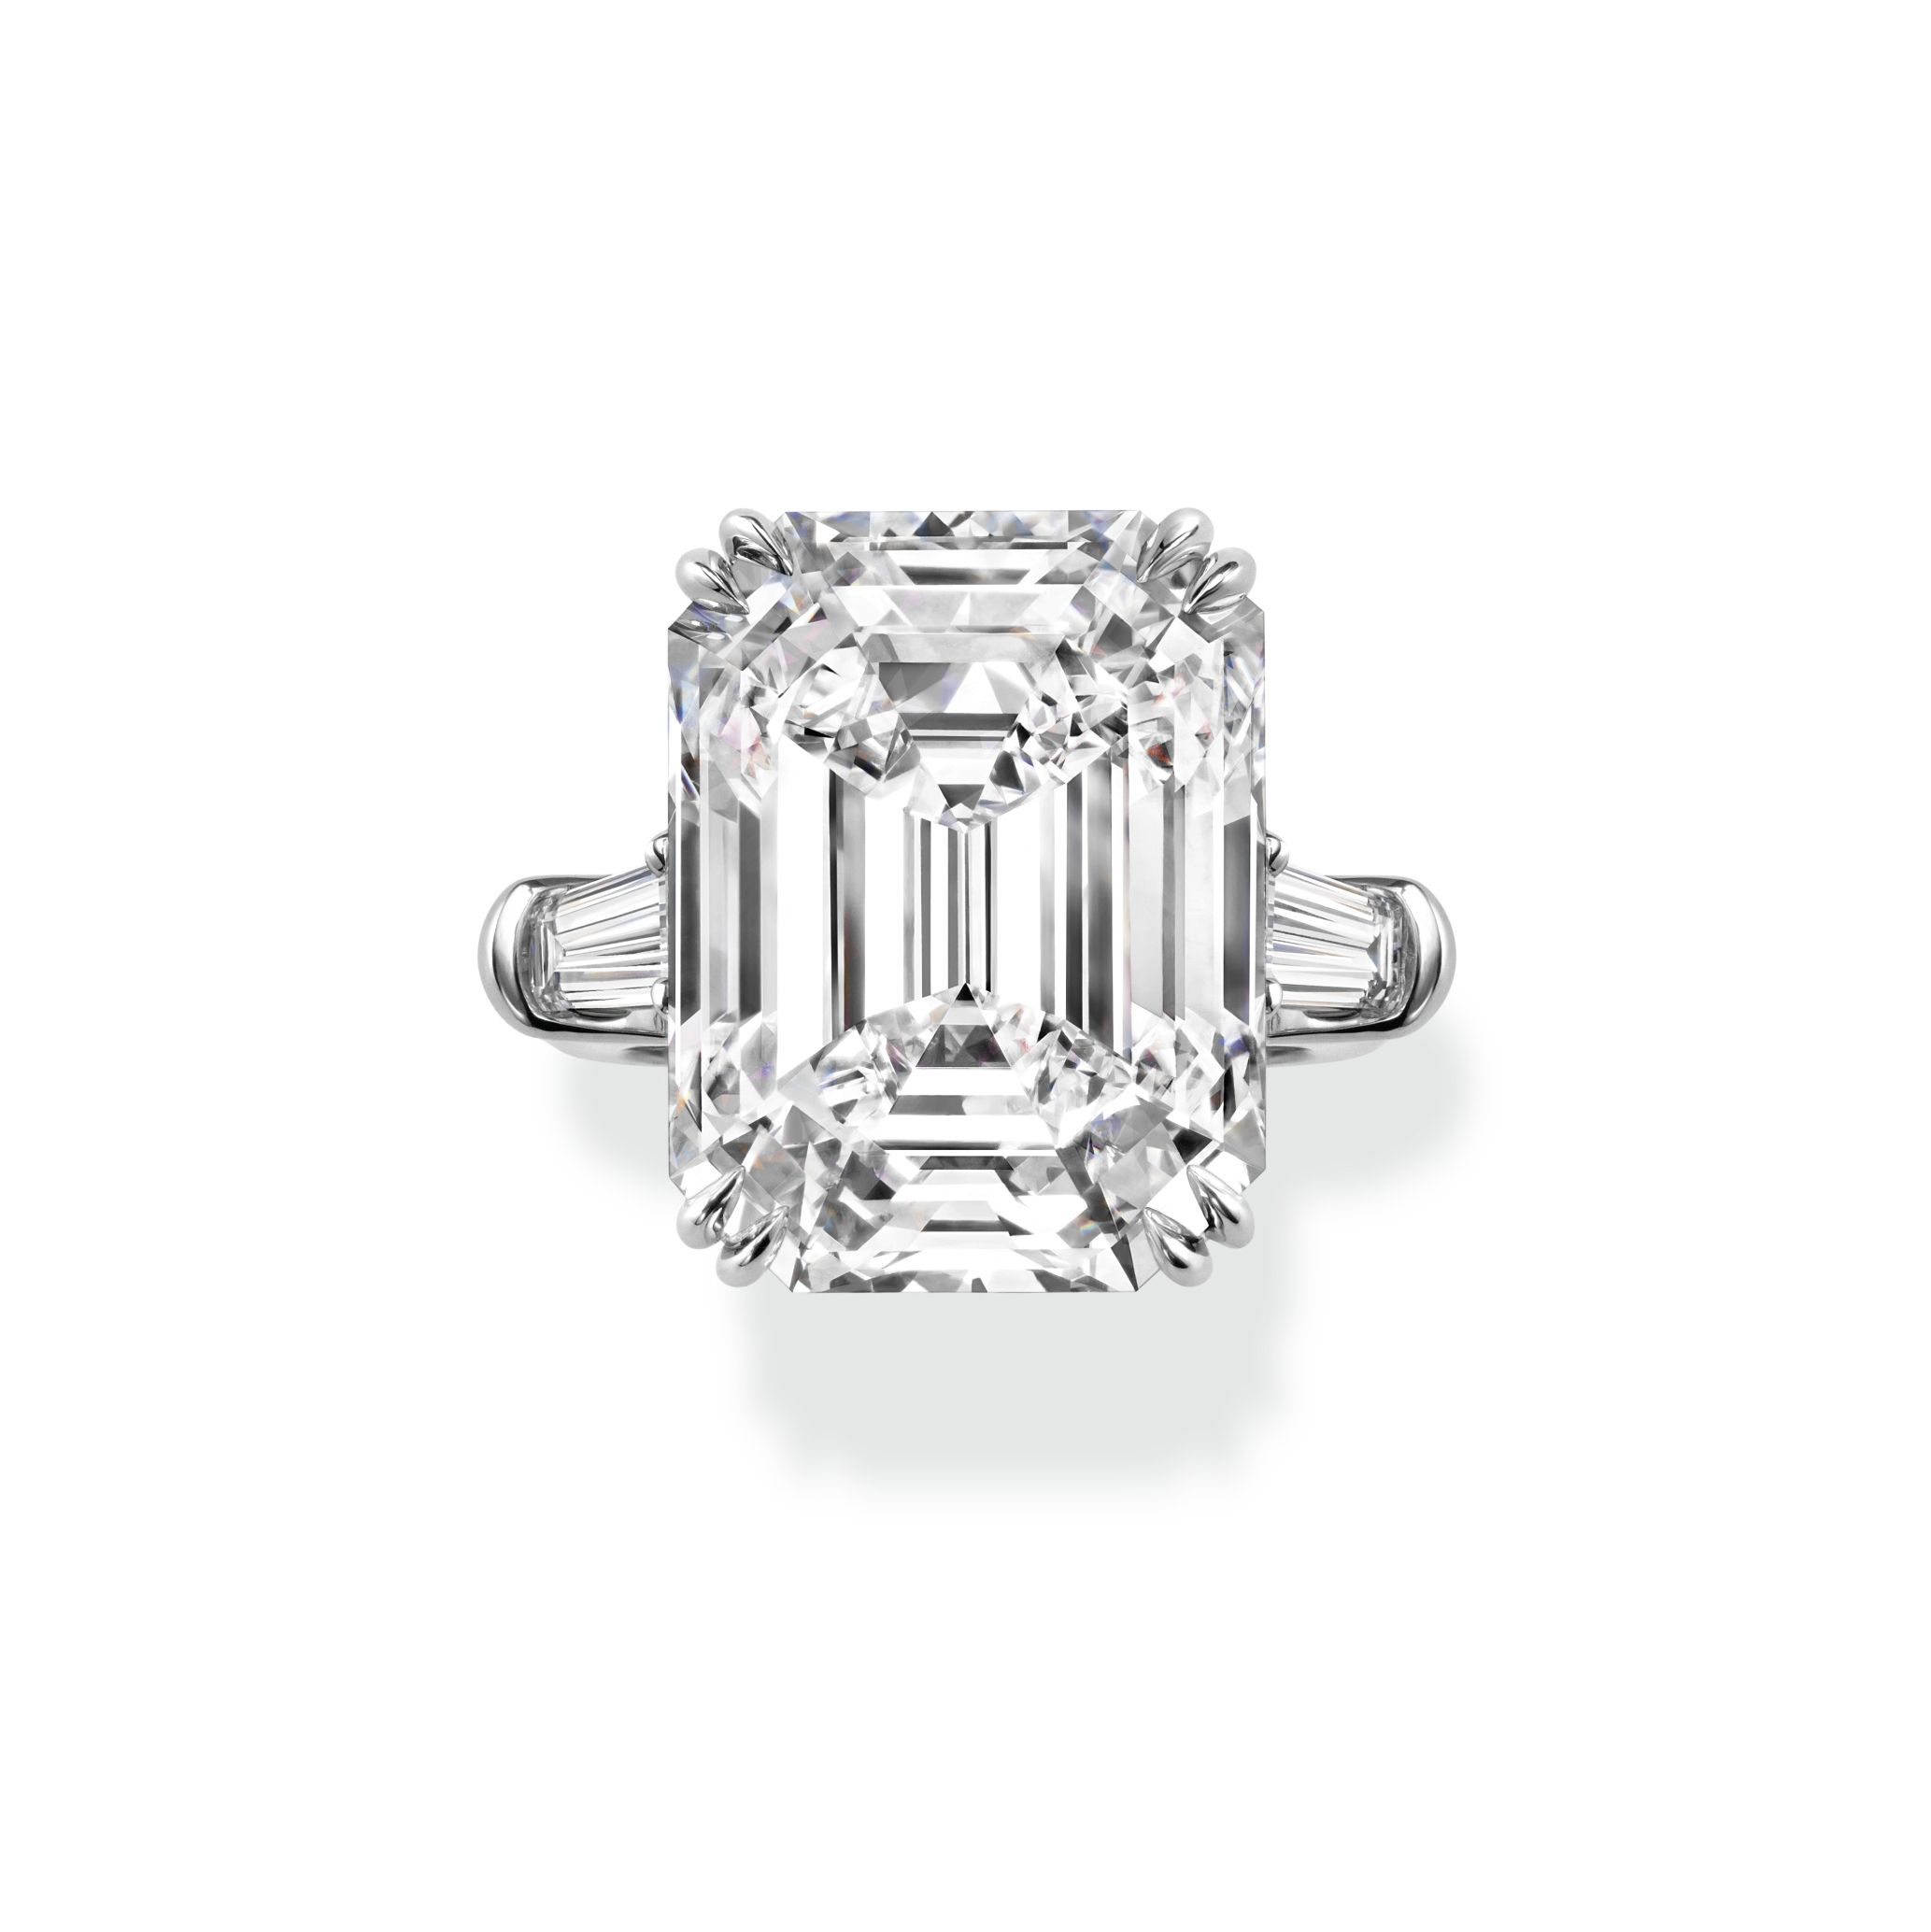 29 Emerald Cut Engagement Rings to 